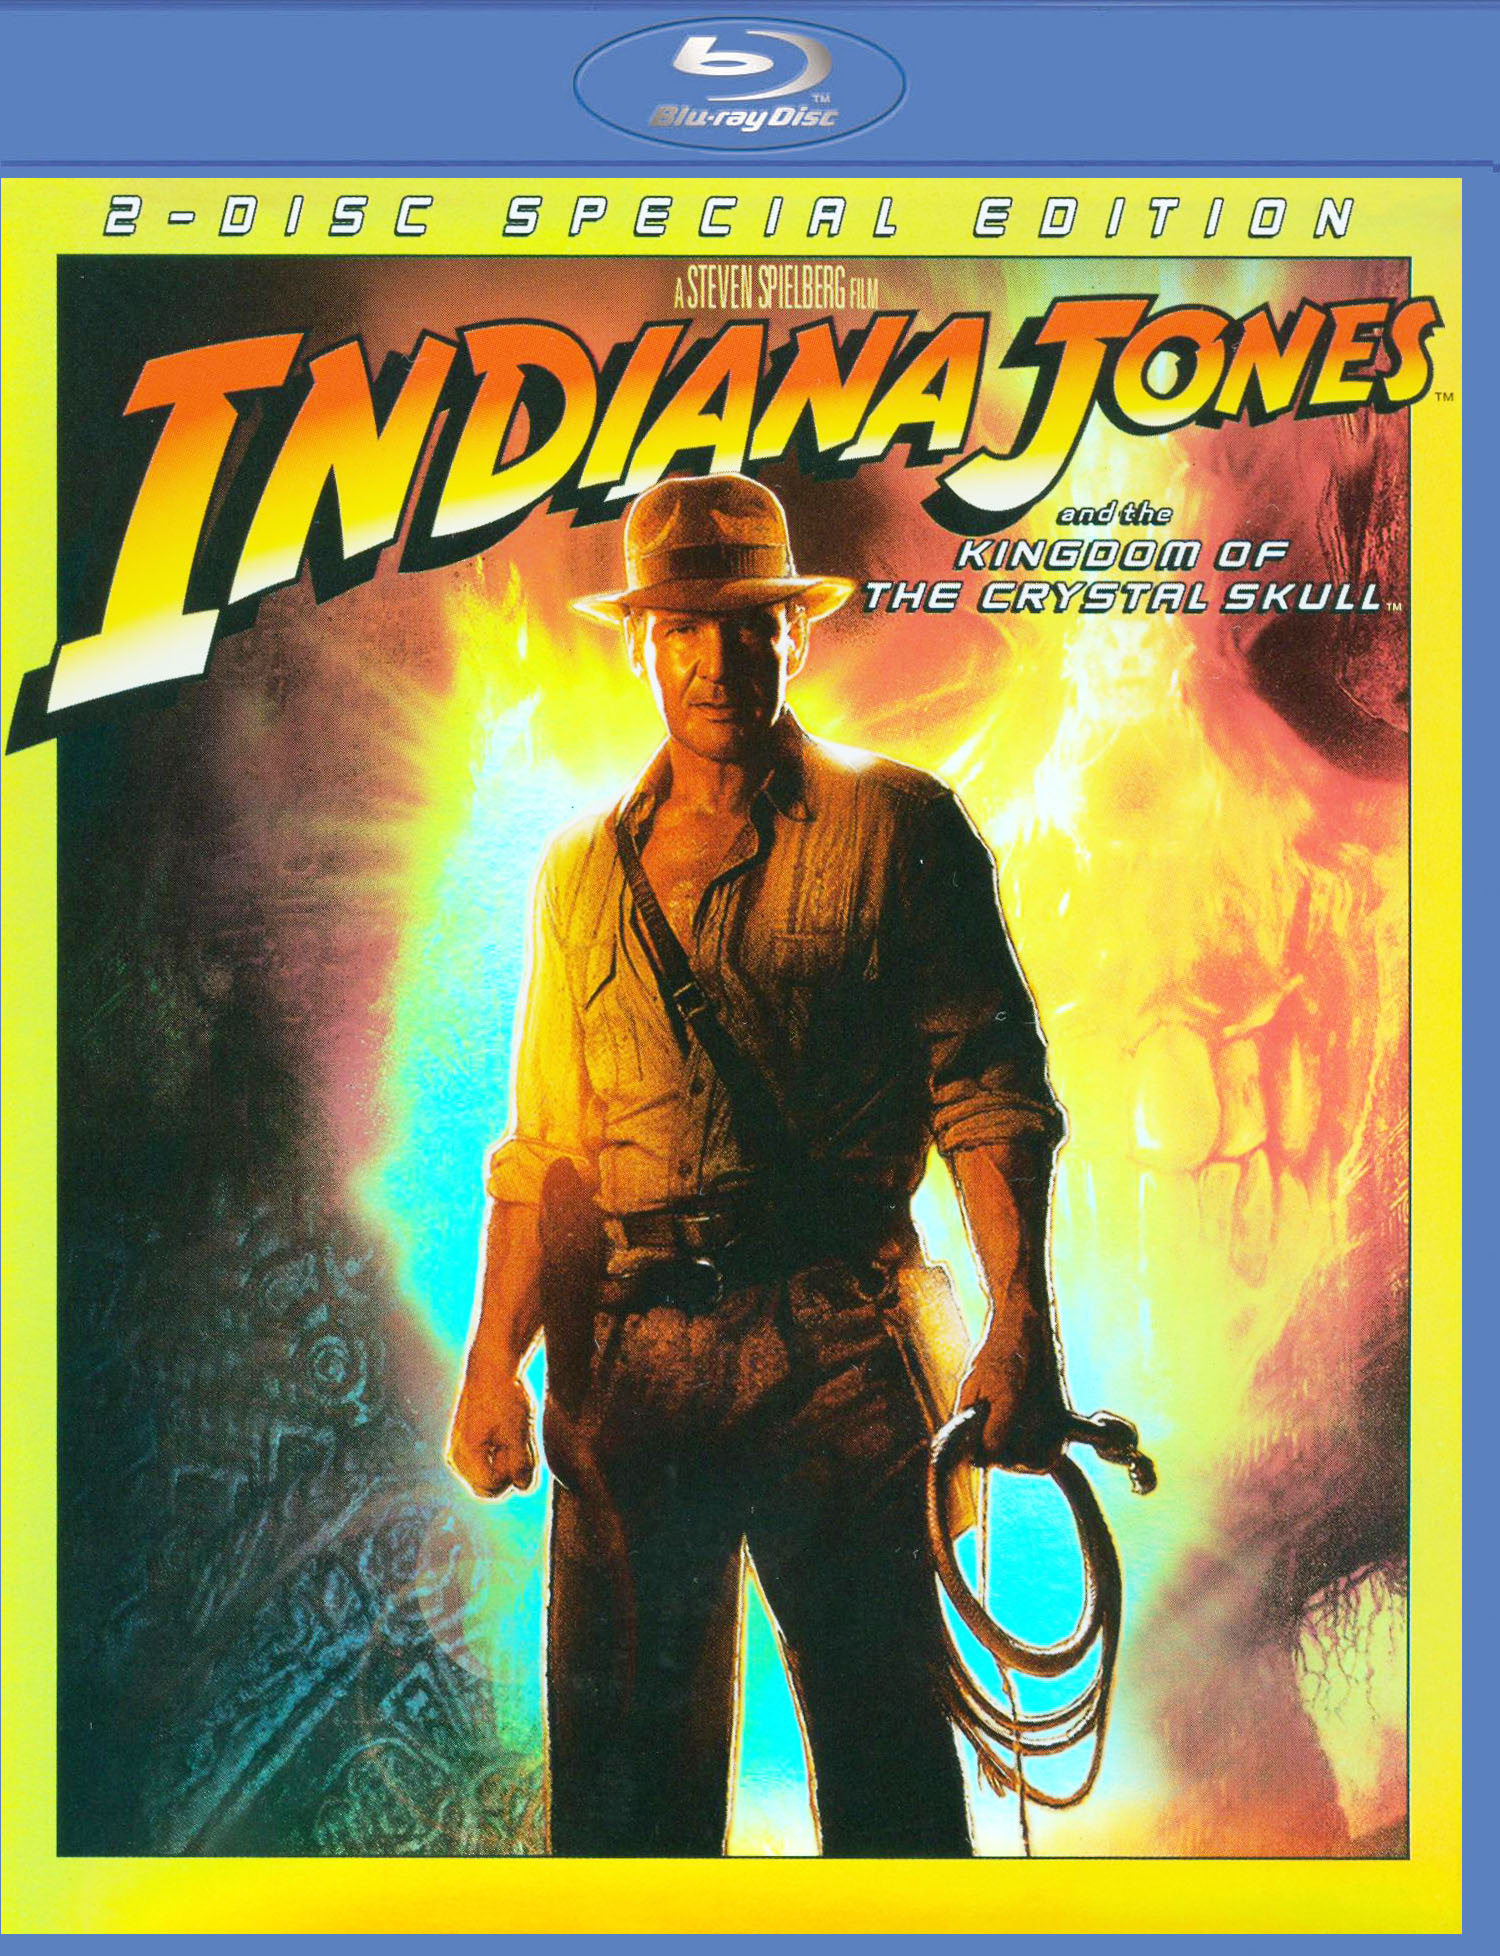 Indiana Jones and the Kingdom of the Crystal Skull [Blu-ray] [2008] - Best  Buy